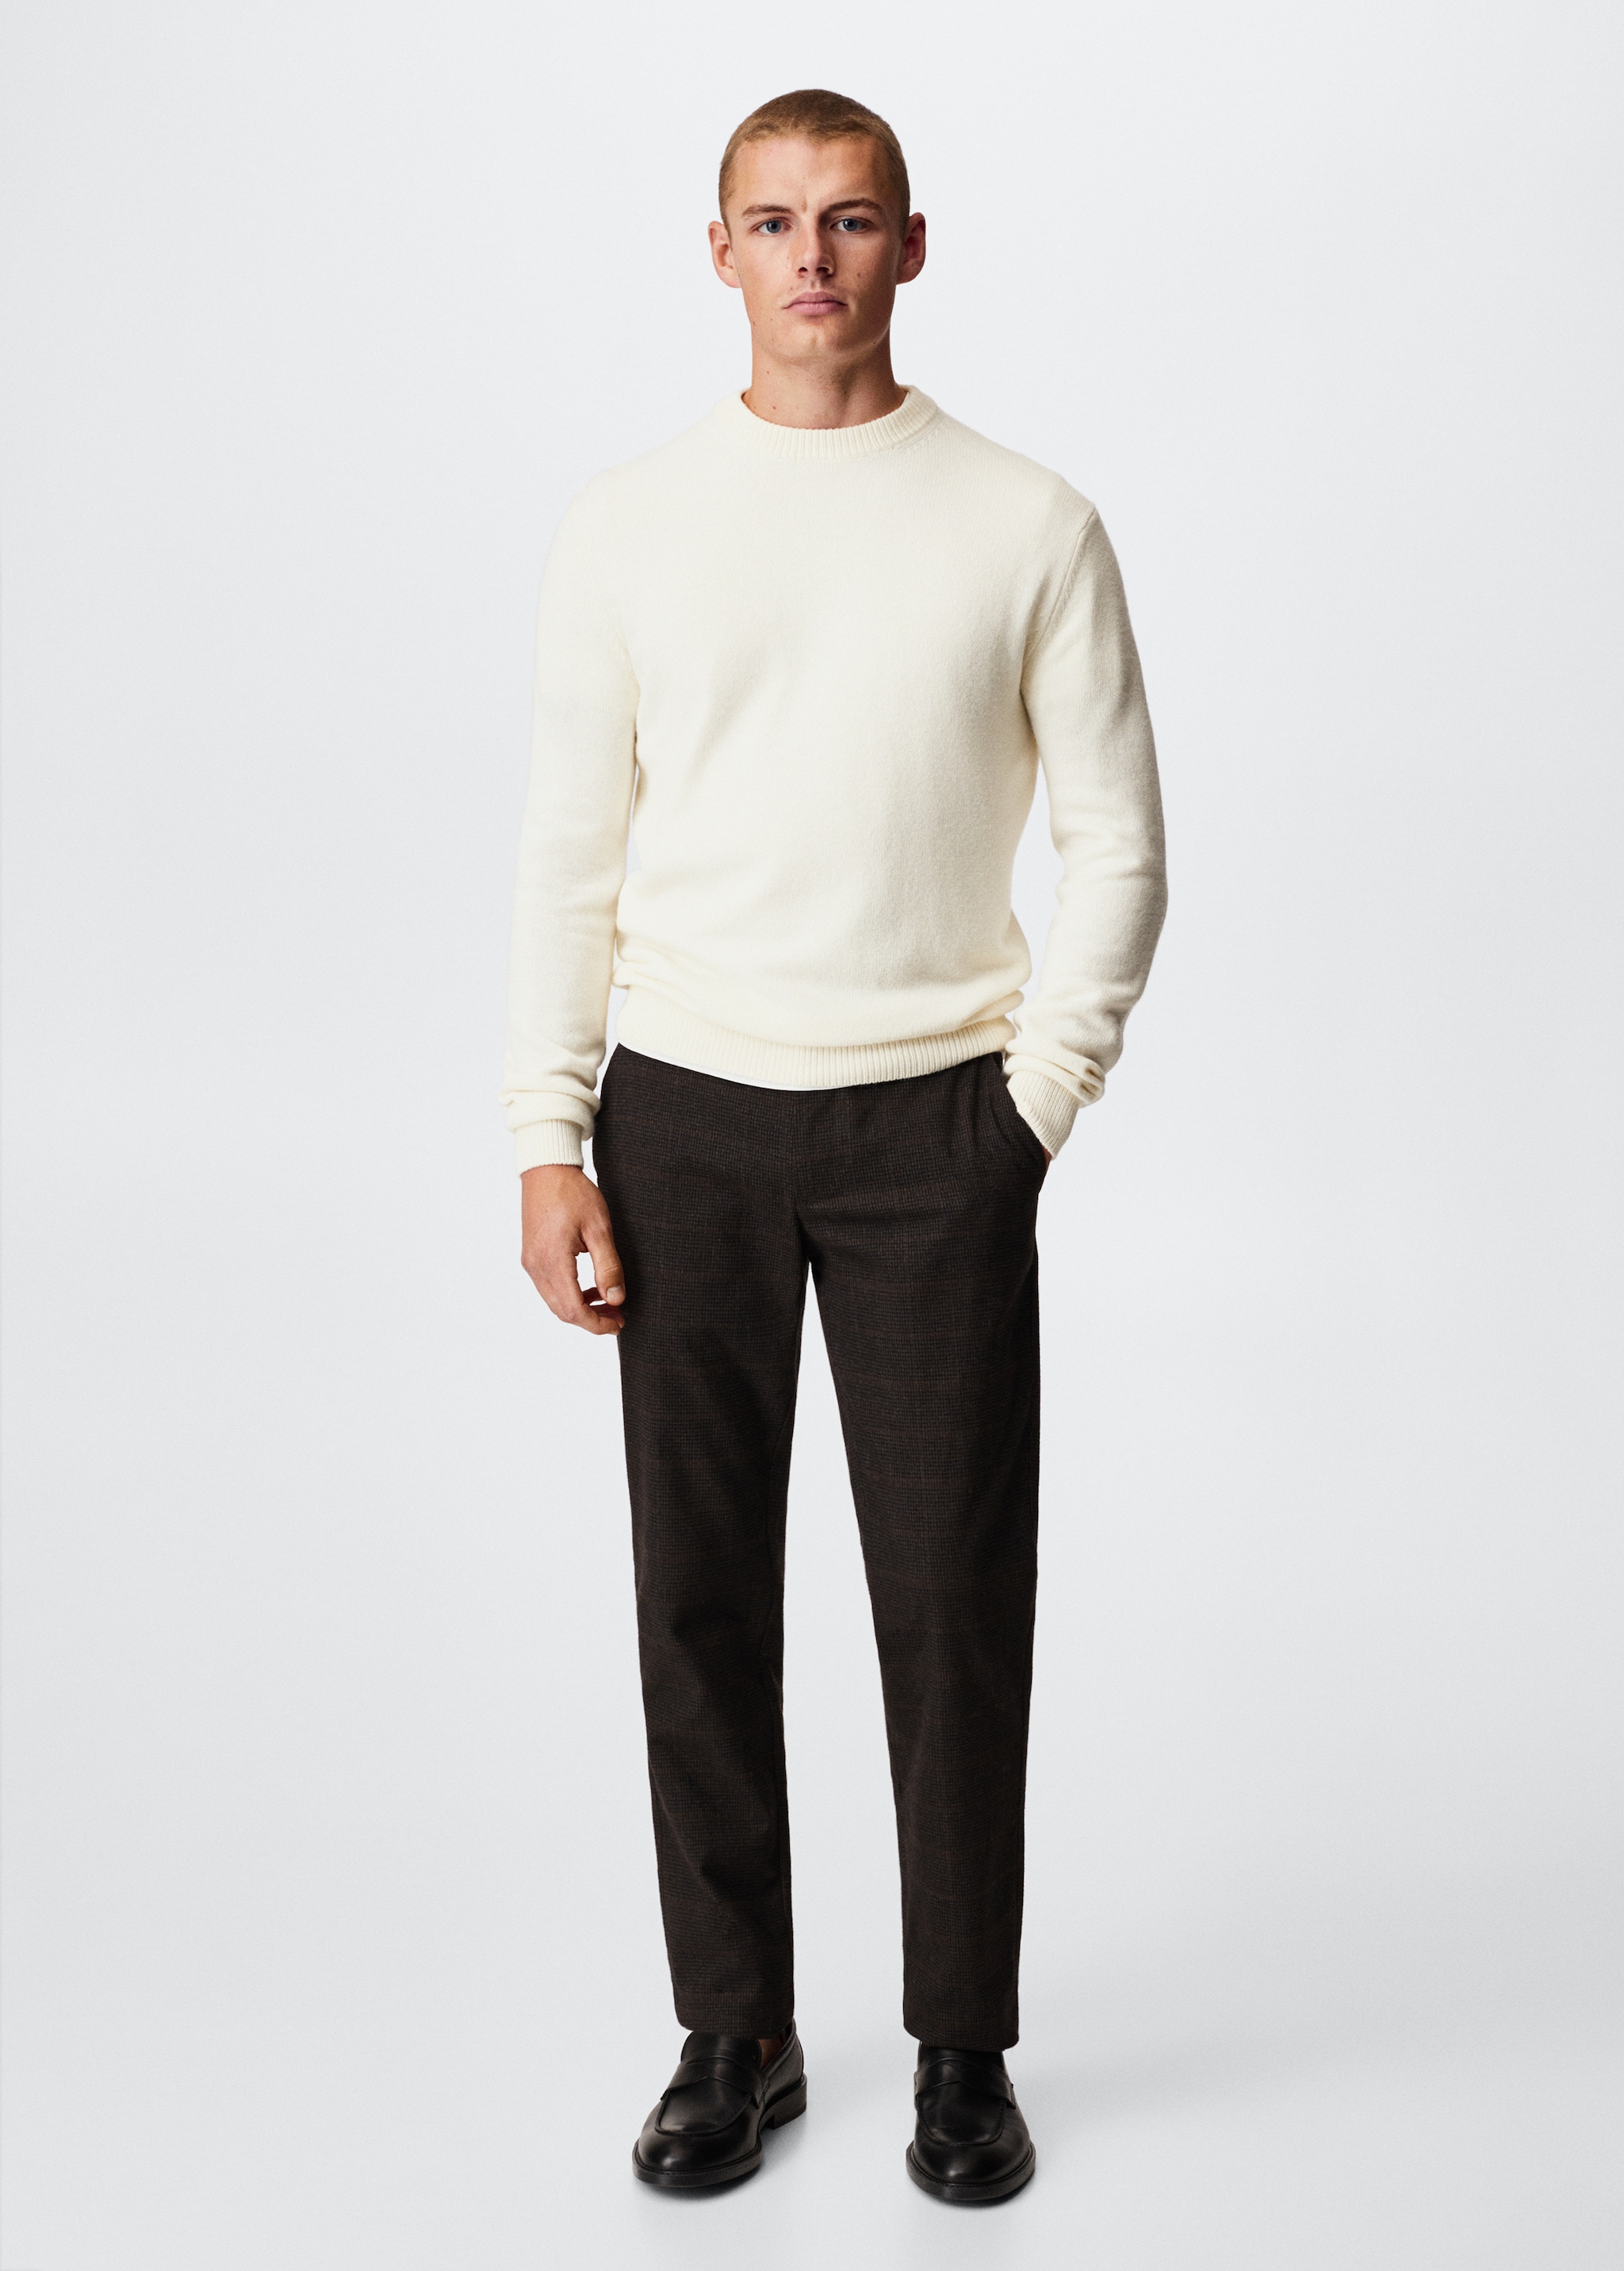 Cashmere wool sweater - General plane